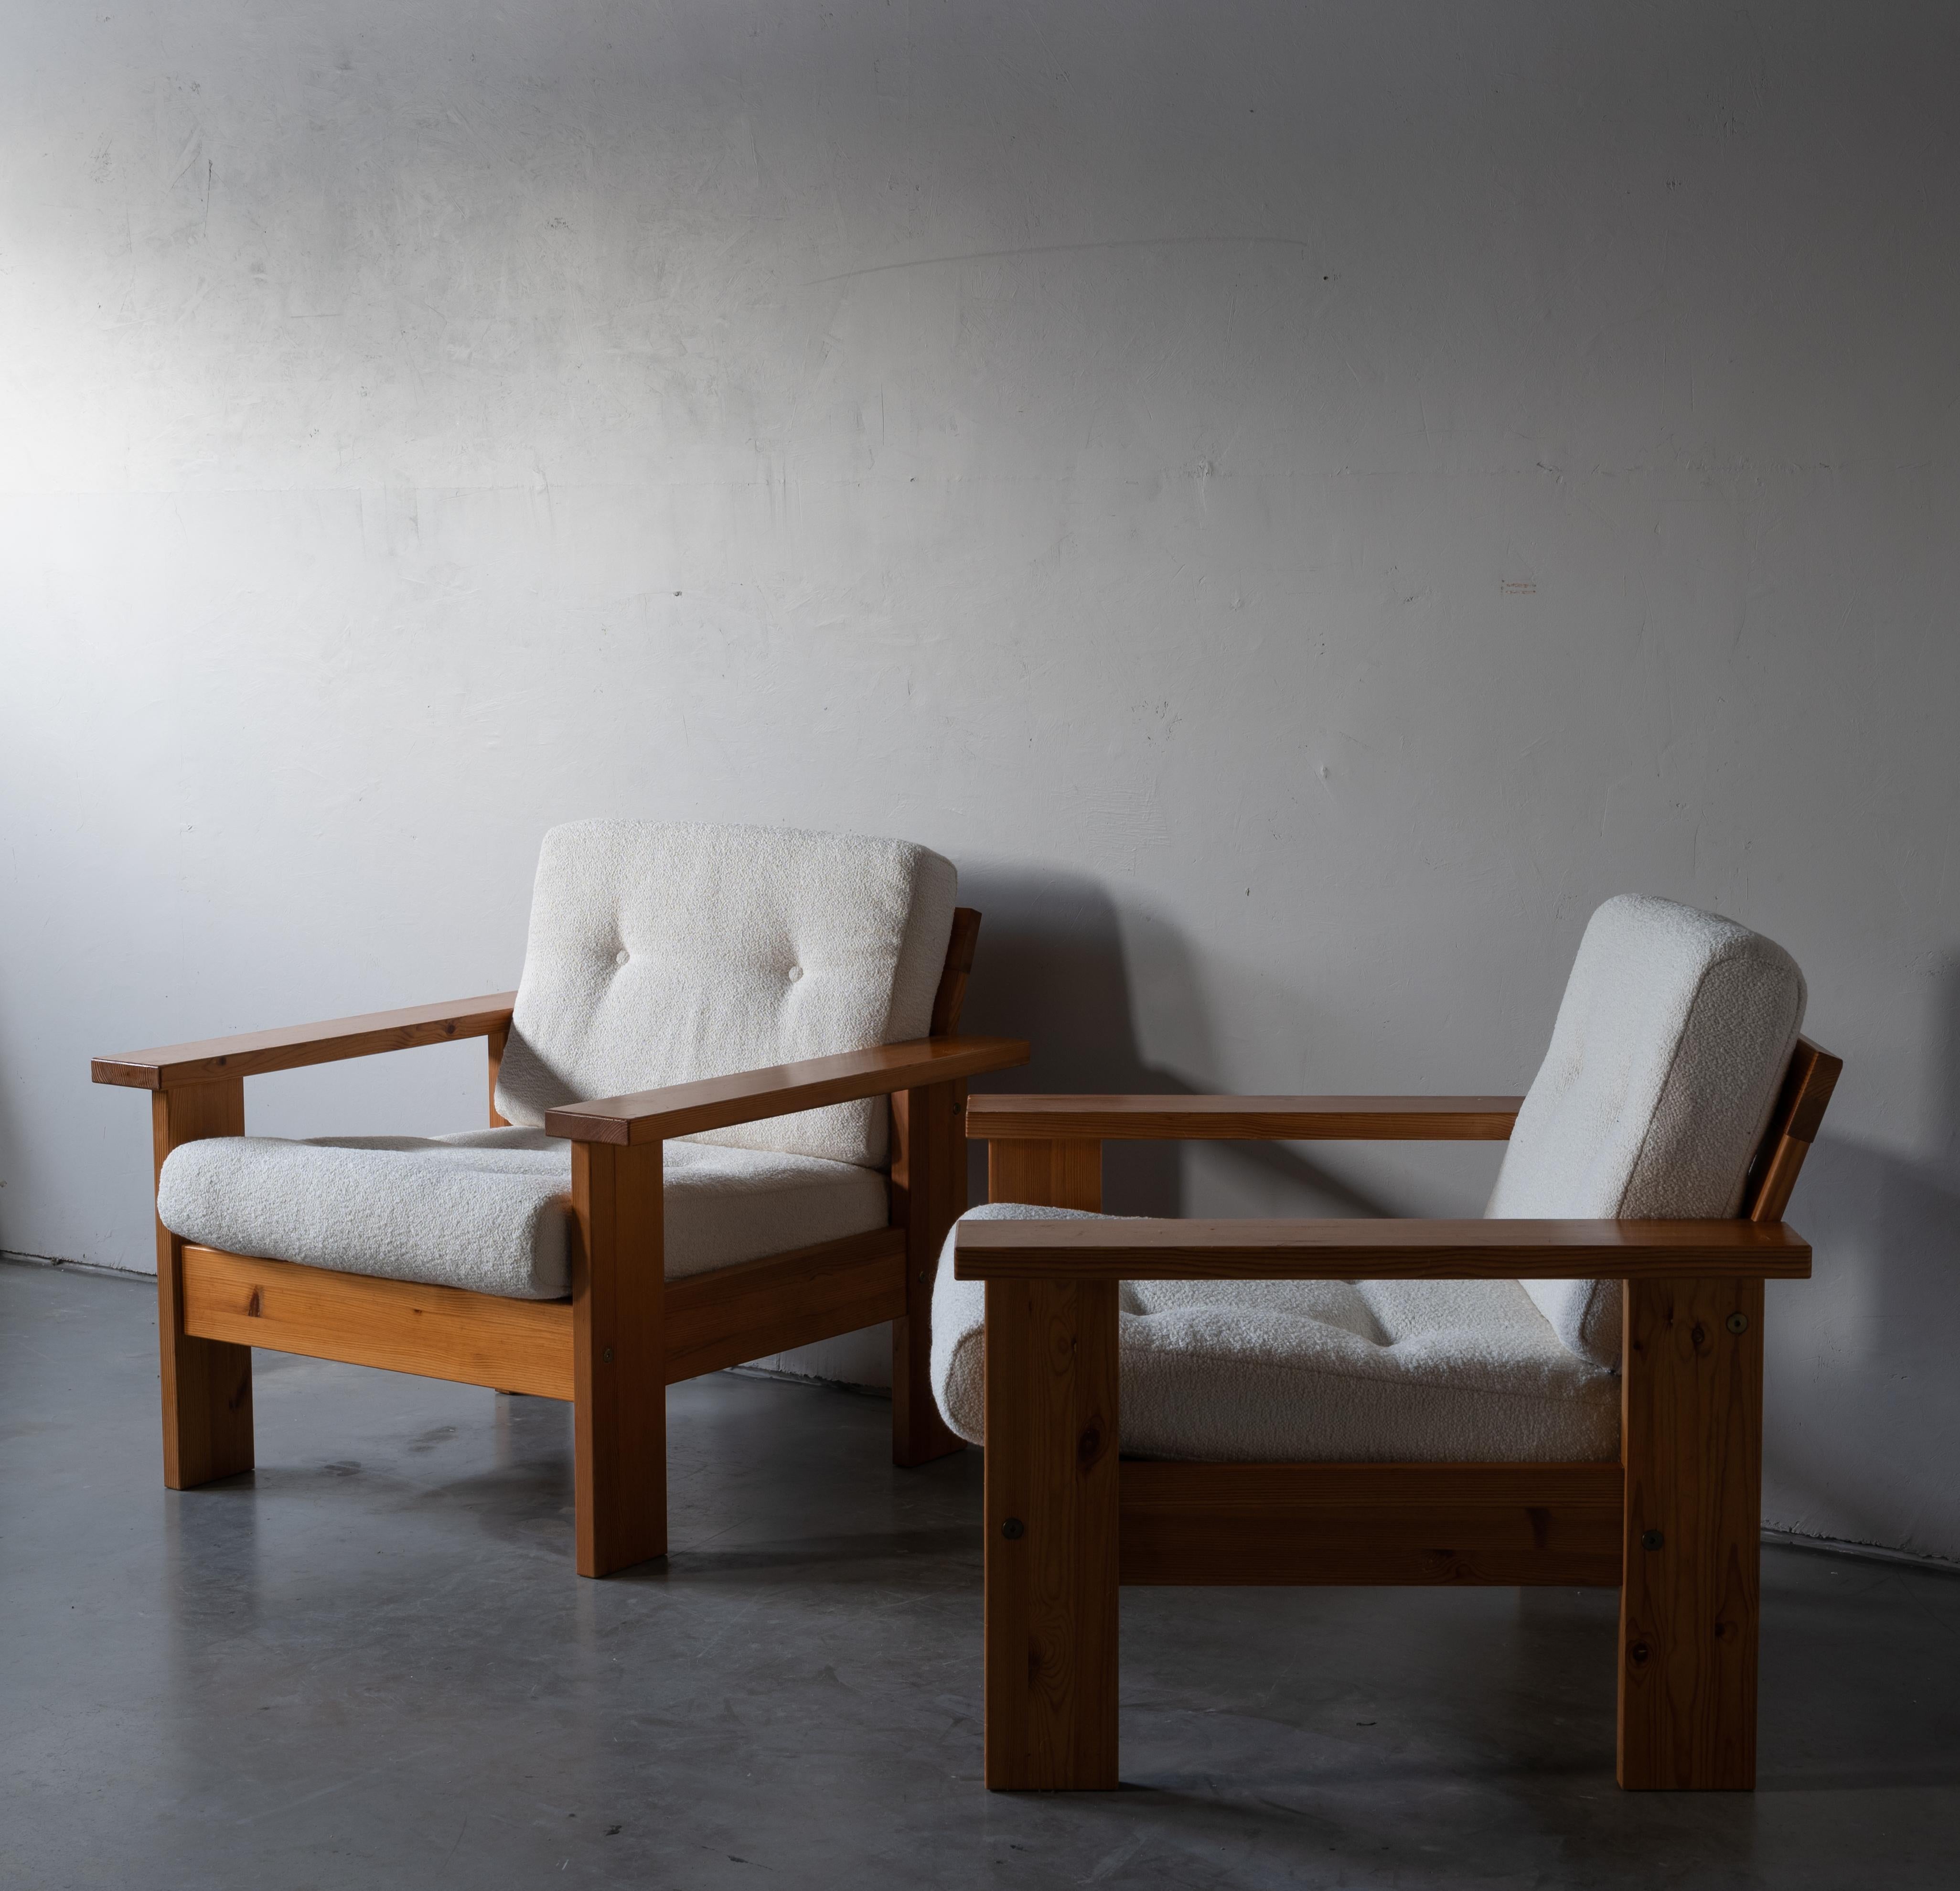 A pair of modernist lounge chair. Designed and made by a Finnish cabinetmaker, 1960s-1970s. In solid pine. Cushions upholstered in brand new high-end bouclé fabric.

Other designers of the period include Axel Einar Hjorth, Pierre Chapo, Charlotte